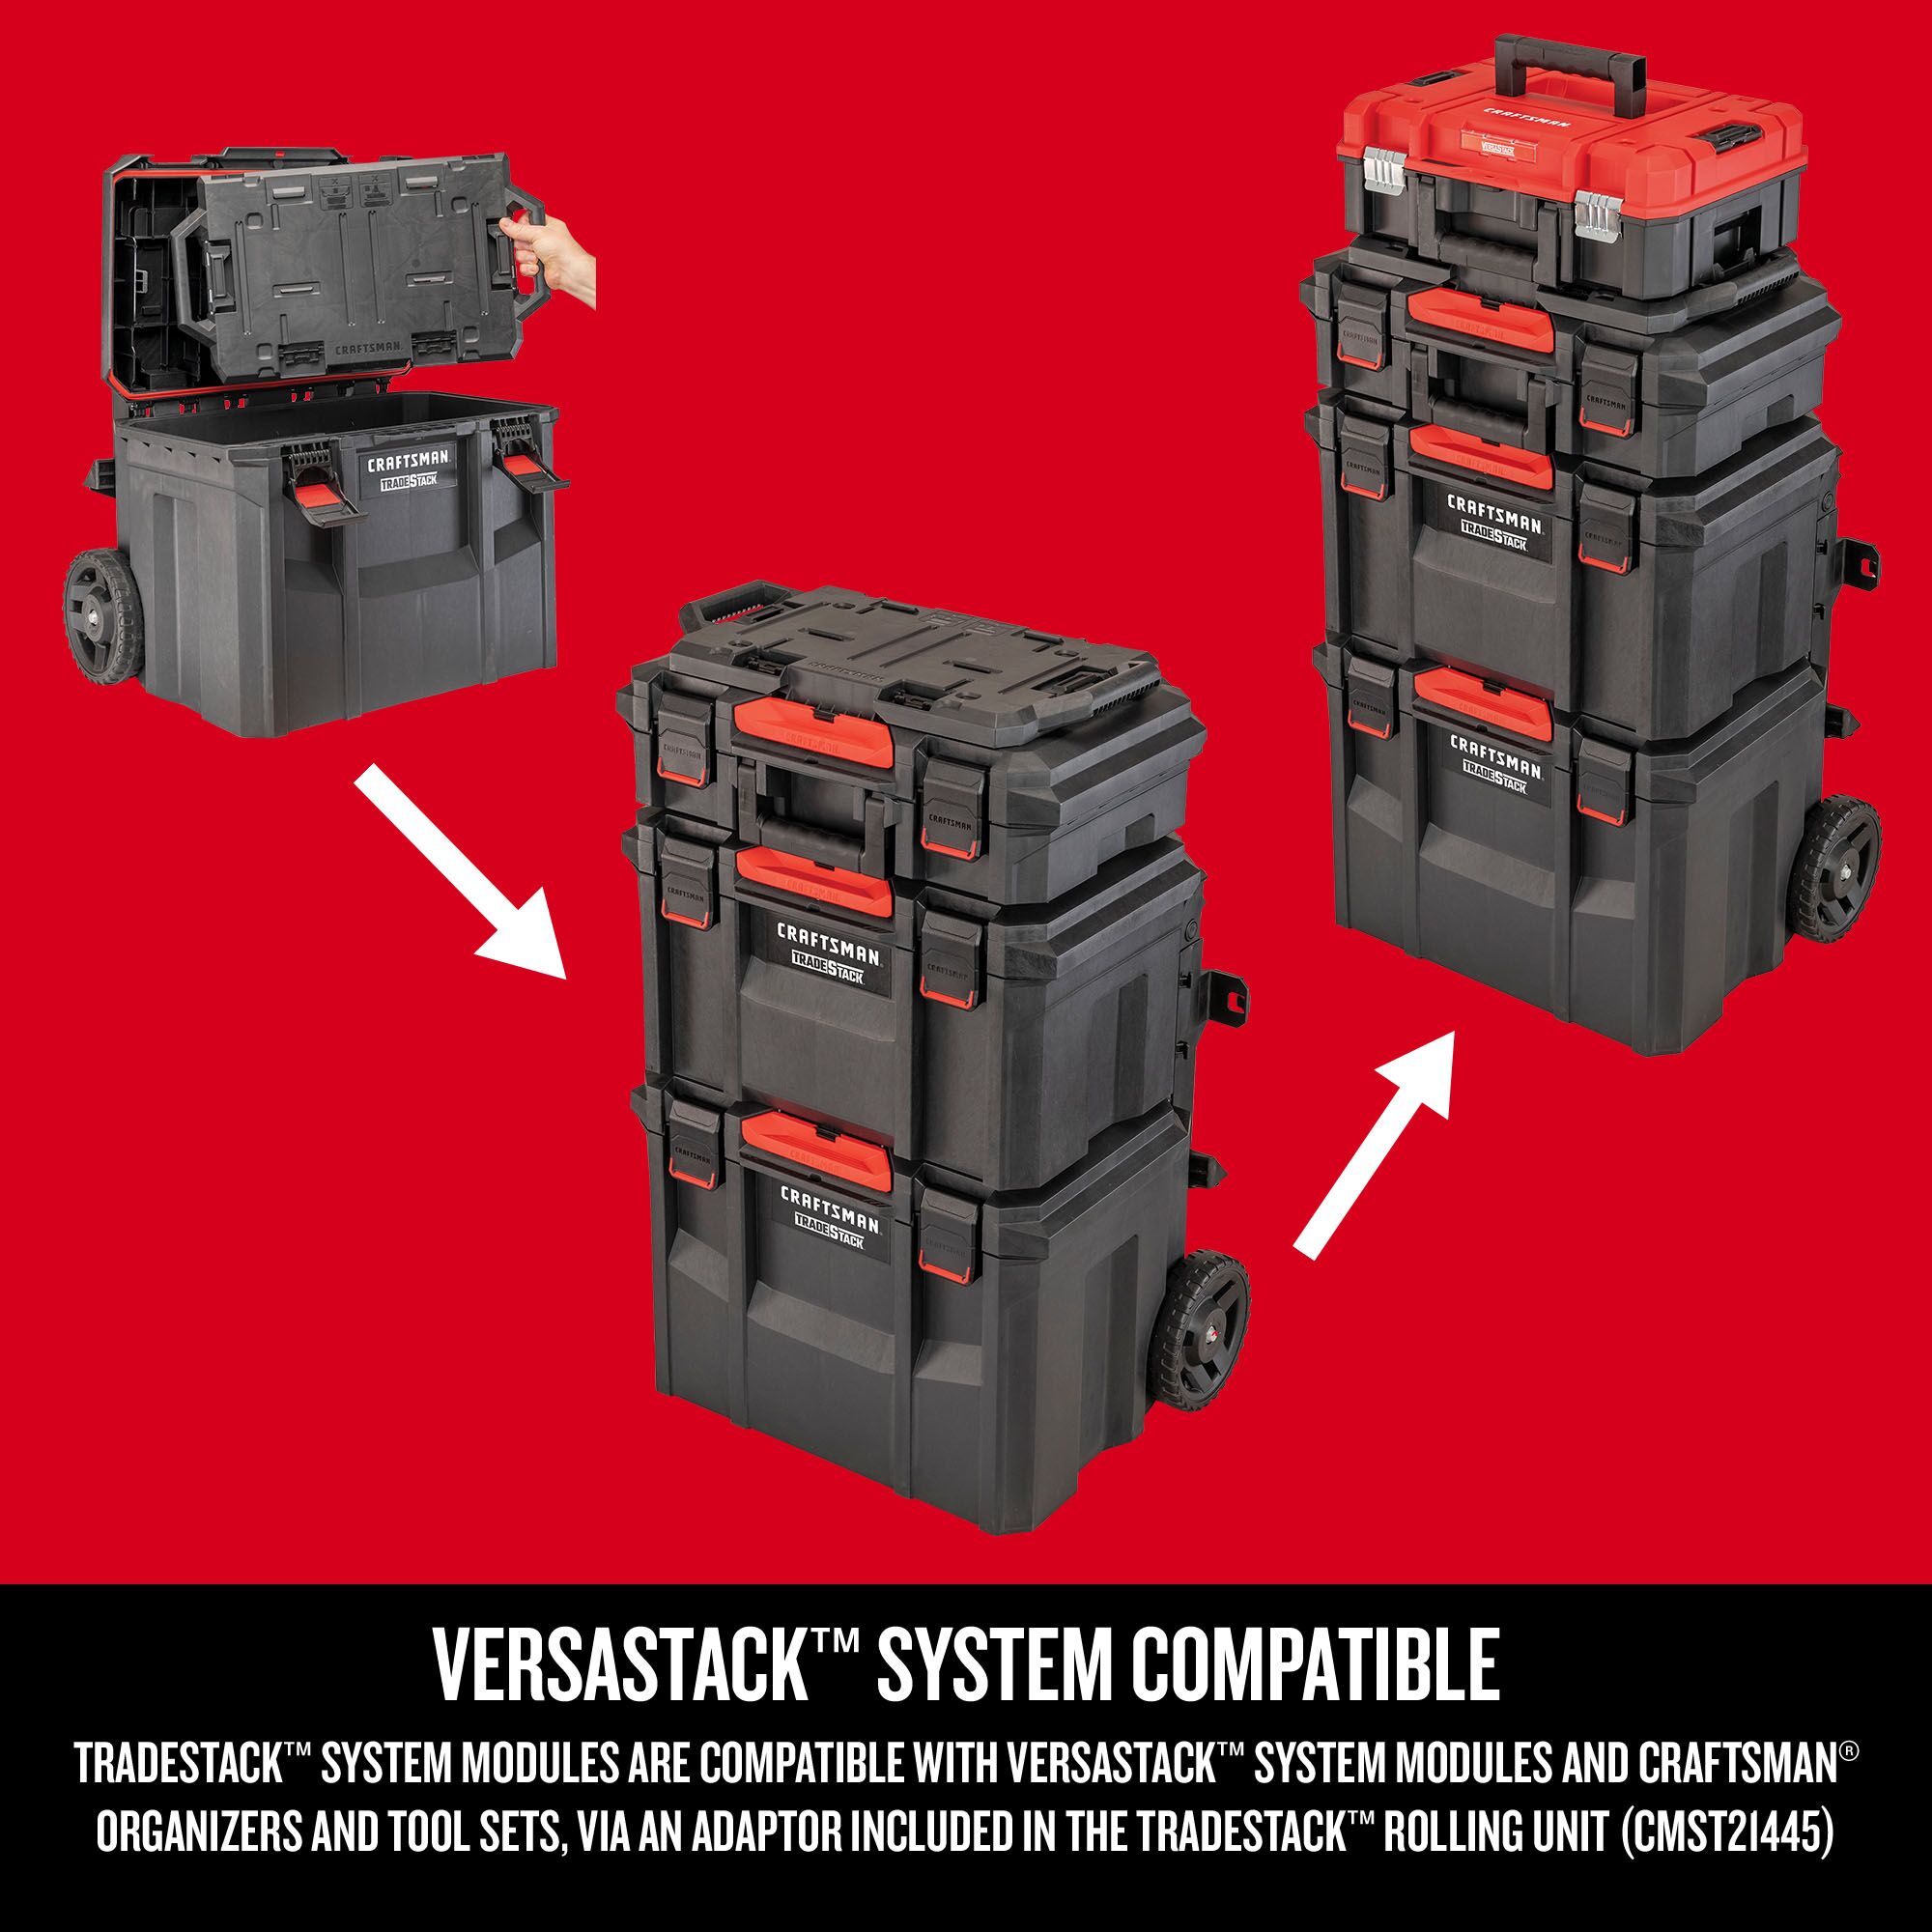 VERSASTACK System Compatible. TRADESTACK System Modules are compatible with VERSASTACK system modules and CRAFTSMAN organizers and tool sets, via an adaptor included in the TRADESTACK Rolling Unit (CMST21445).